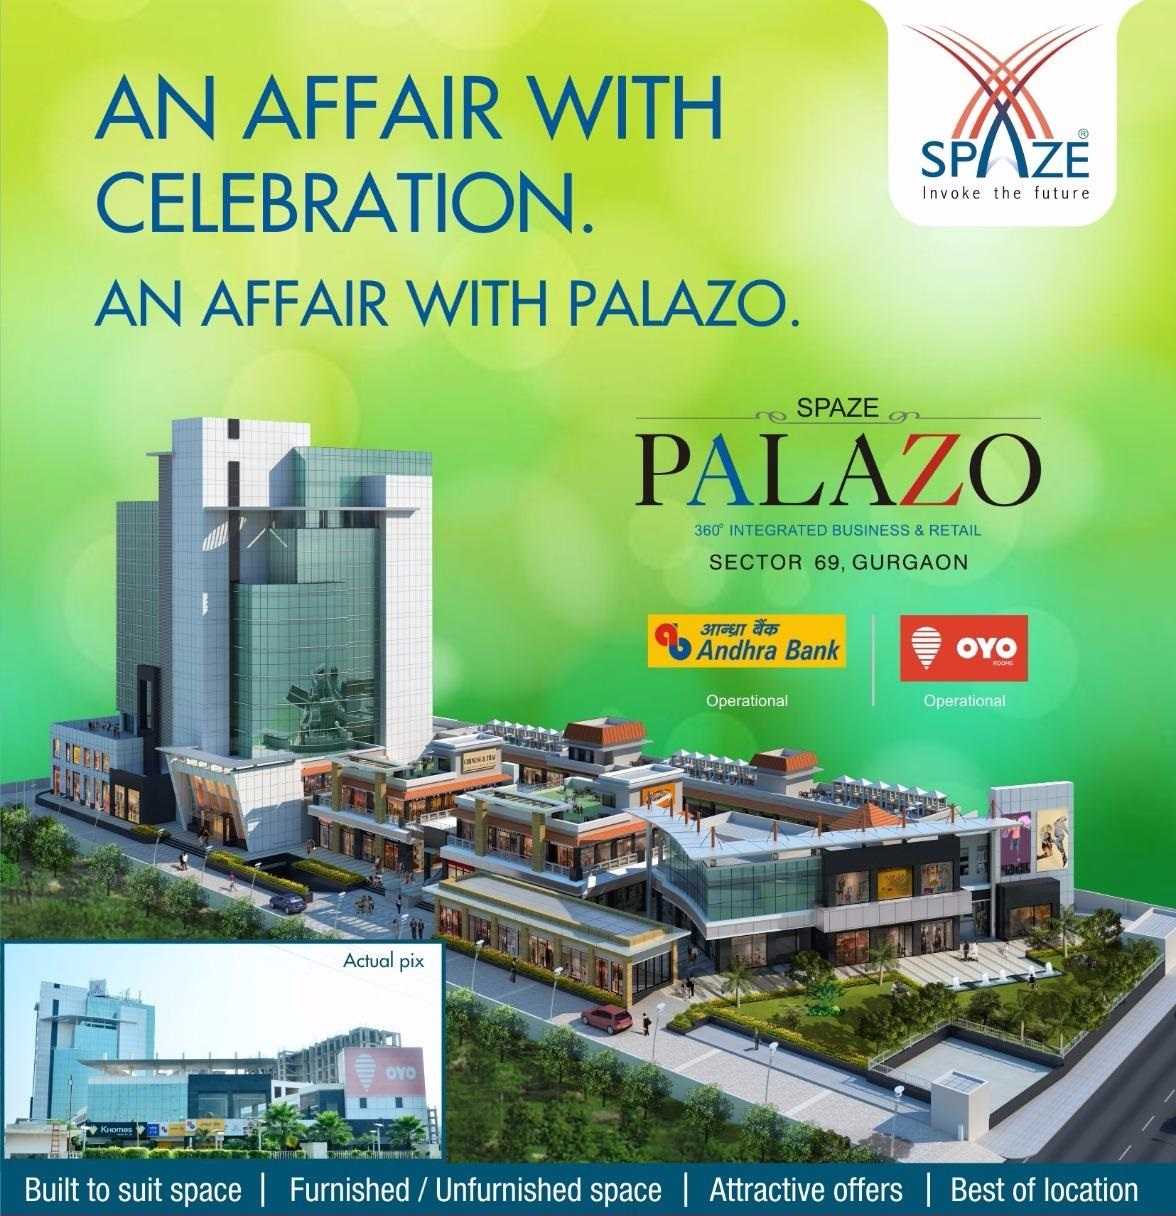 Spaze Palazo - 360 degree integrated business & retail space in Gurgaon